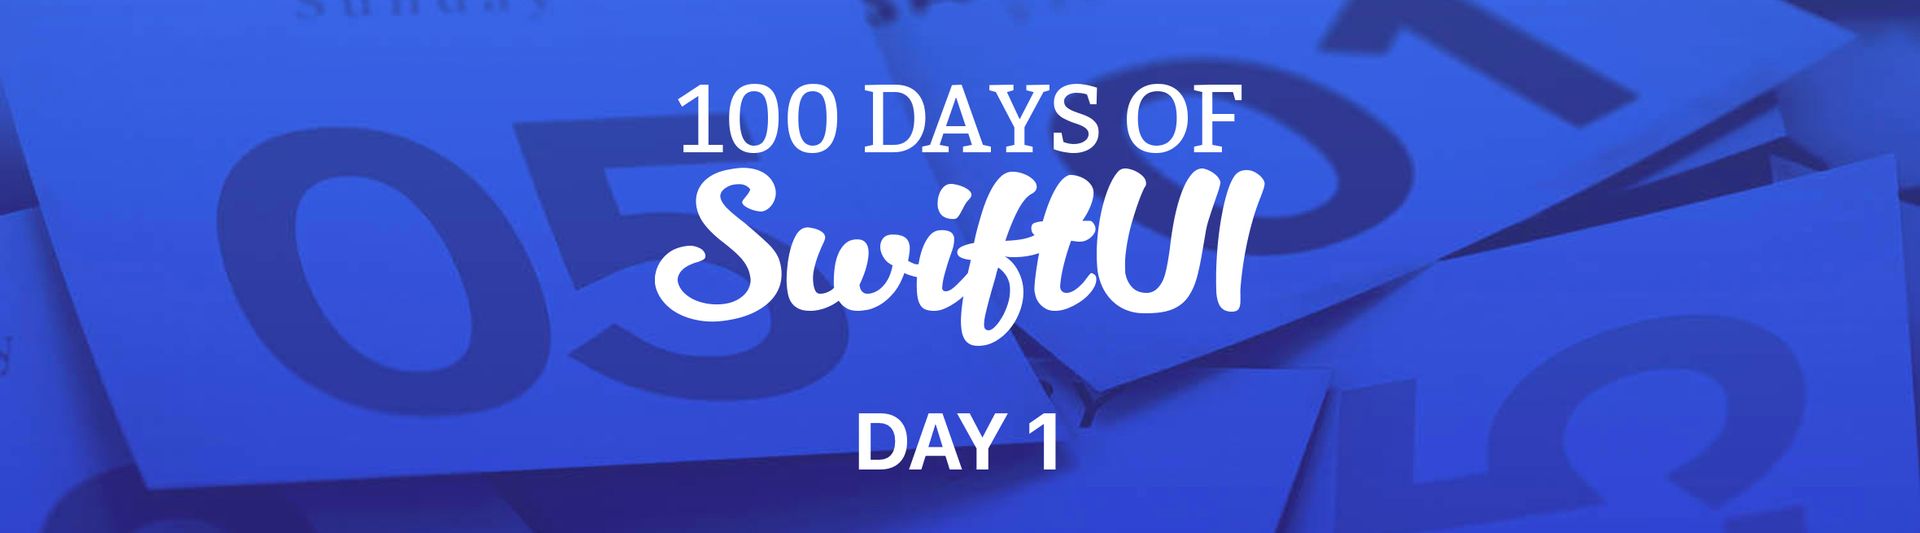 100 Days of SwiftUI - Day 1